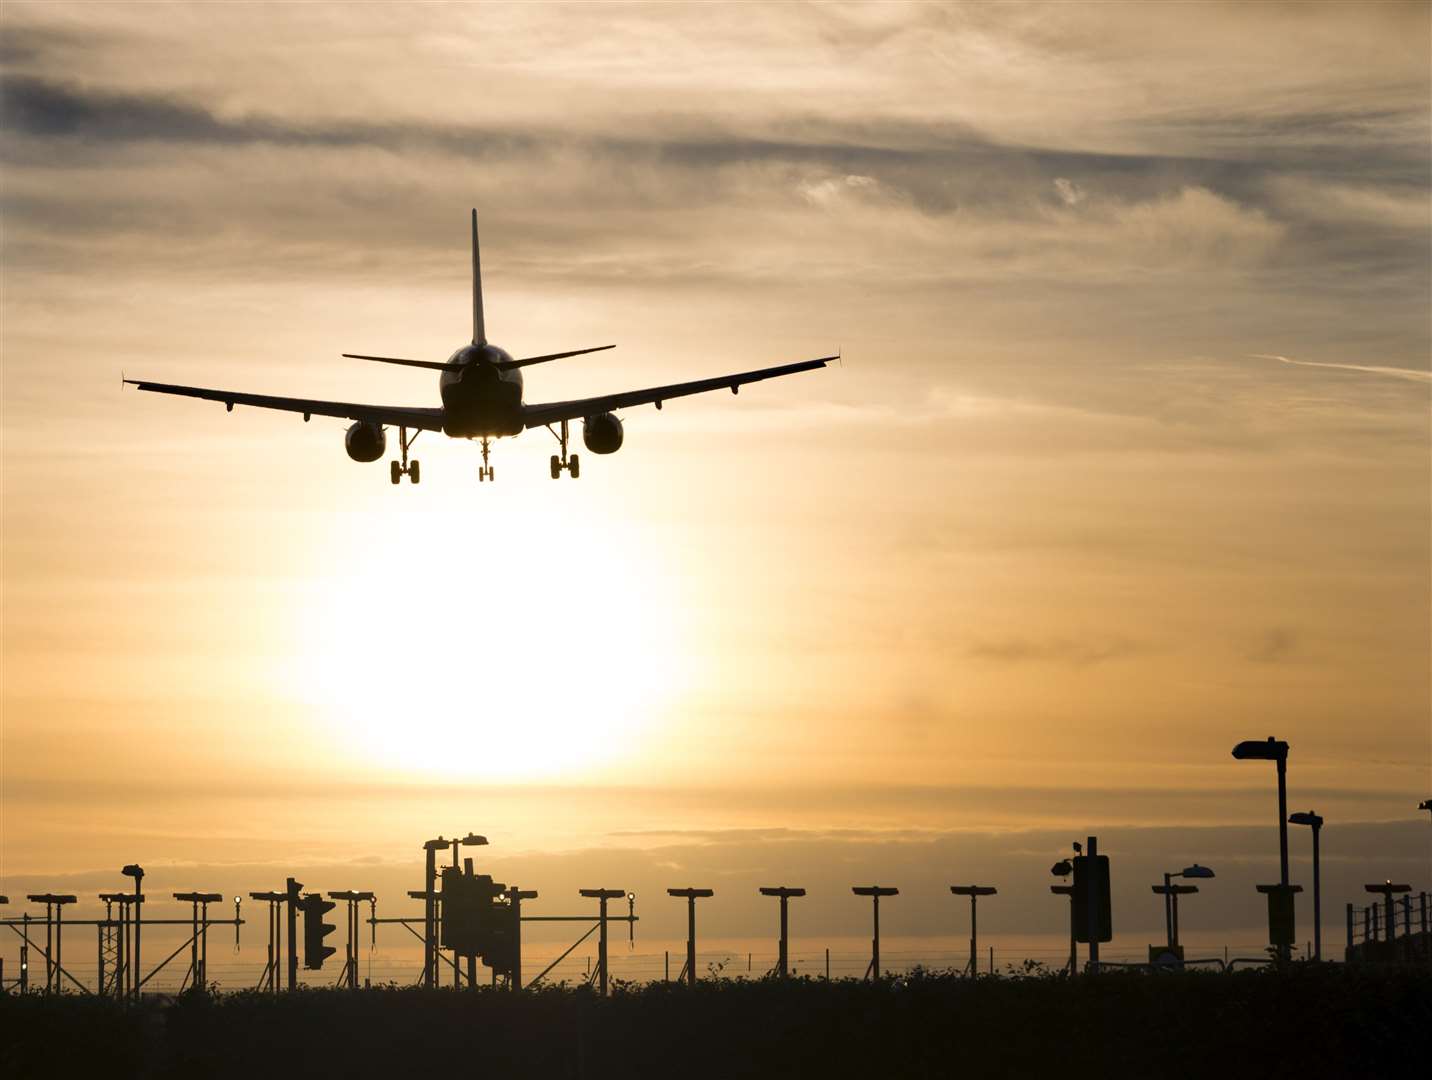 Airports have faced disruption since routes reopened. Photo: iStock.